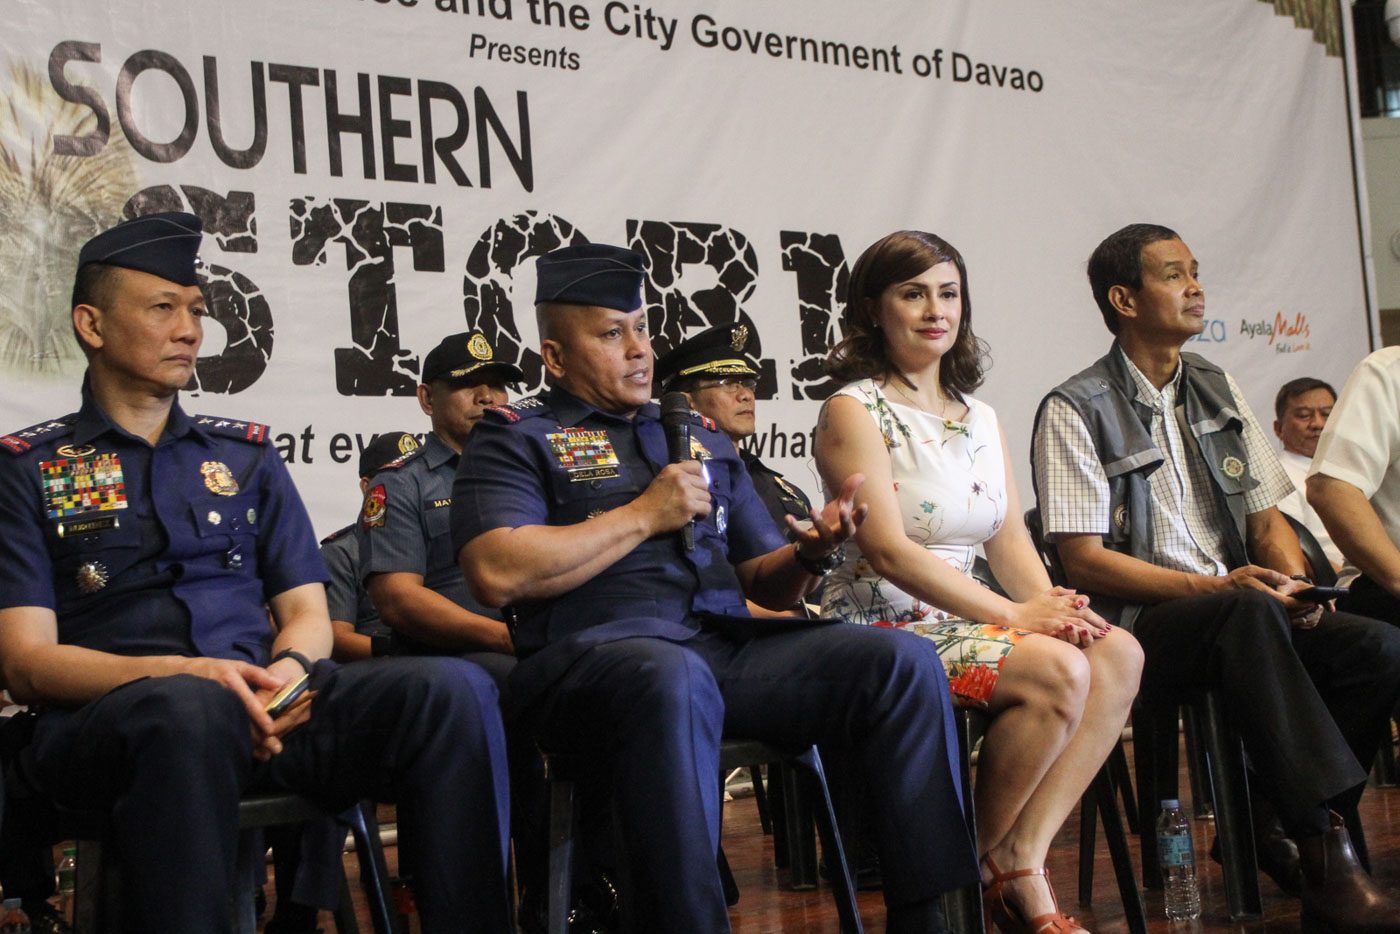 ALMOST PERFECT. PNP chief Director General Ronald dela Rosa (2nd from left) at a press conference after the Southern Storm drill on February 28, 2018. Photo by Manman Dejeto/Rappler  